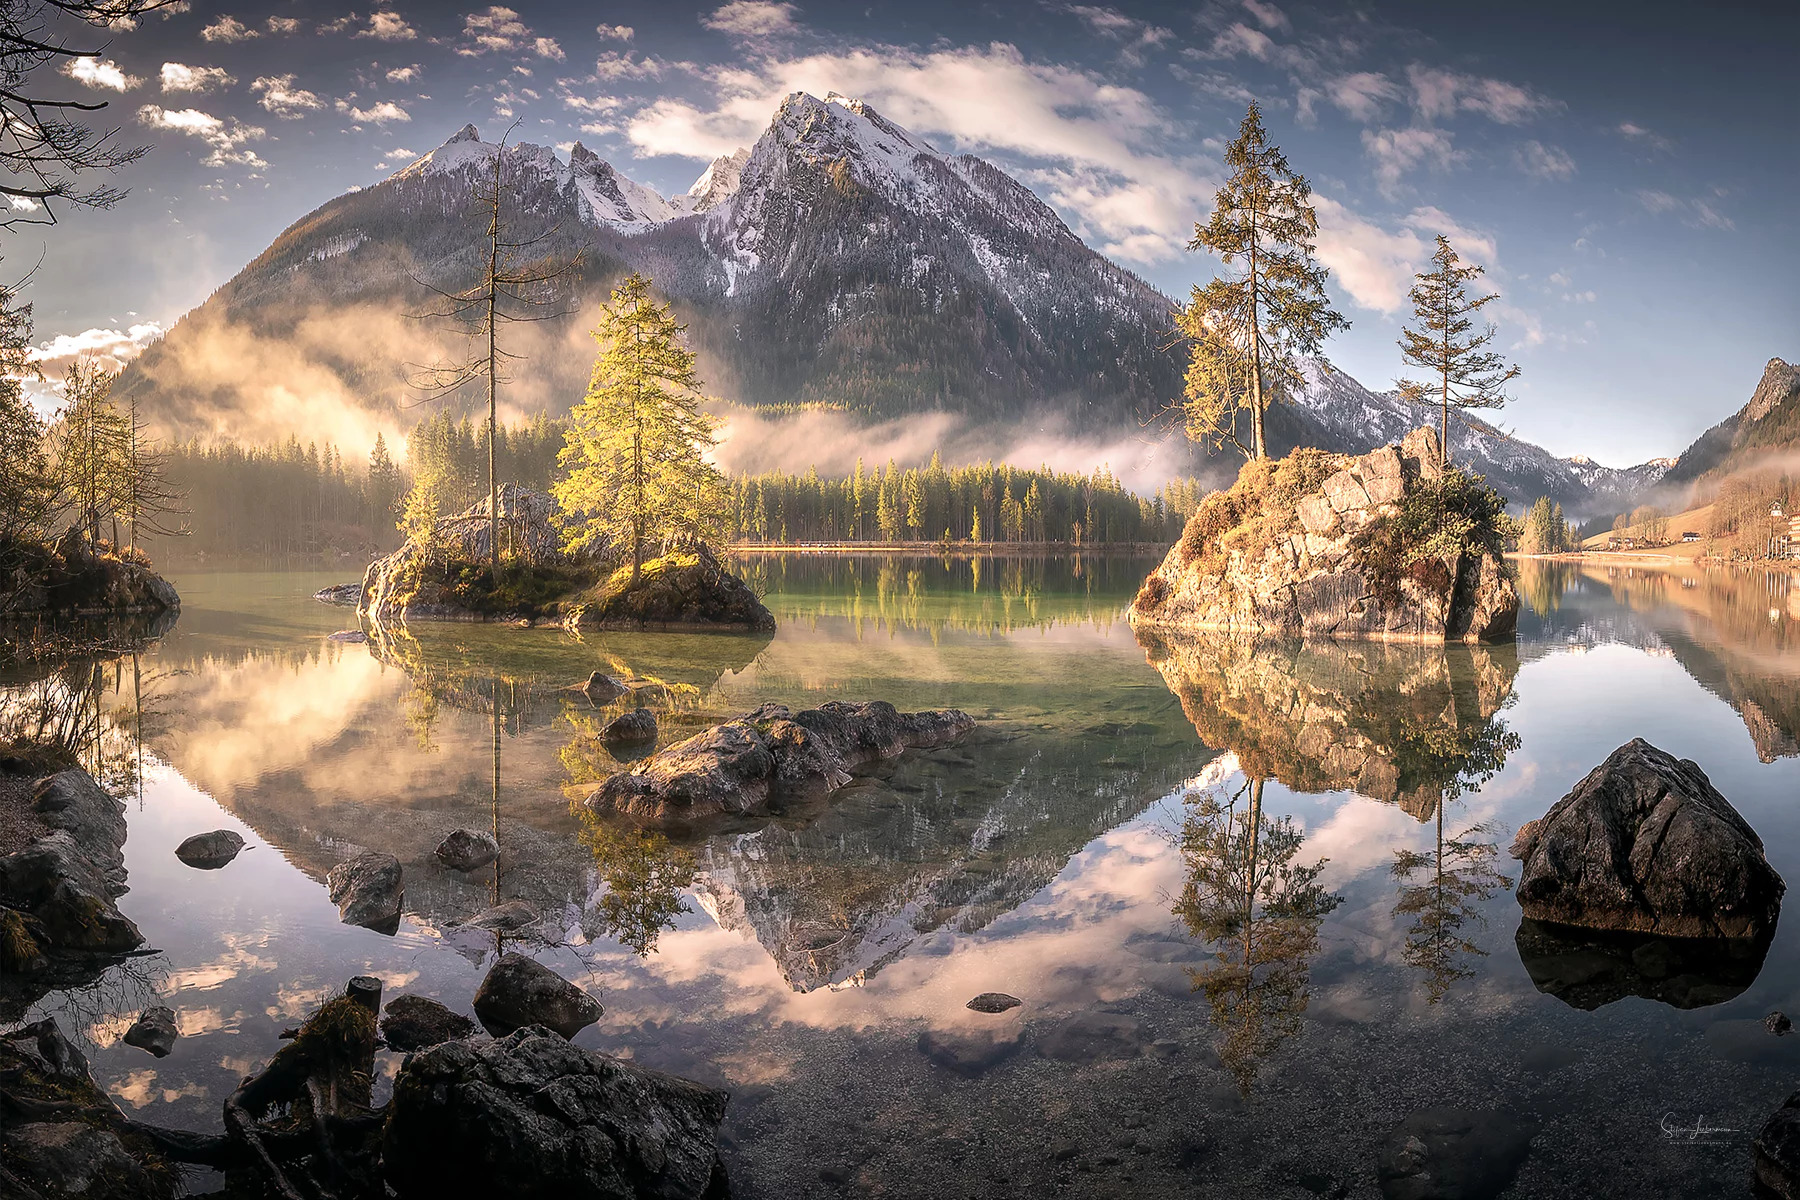 Hintersee Lake photo at sunrise with reflections of a distant peak in the Bavarian Alps | Photo Title: Hintersee | 
        Photo by Steffi Liebermann ©2020